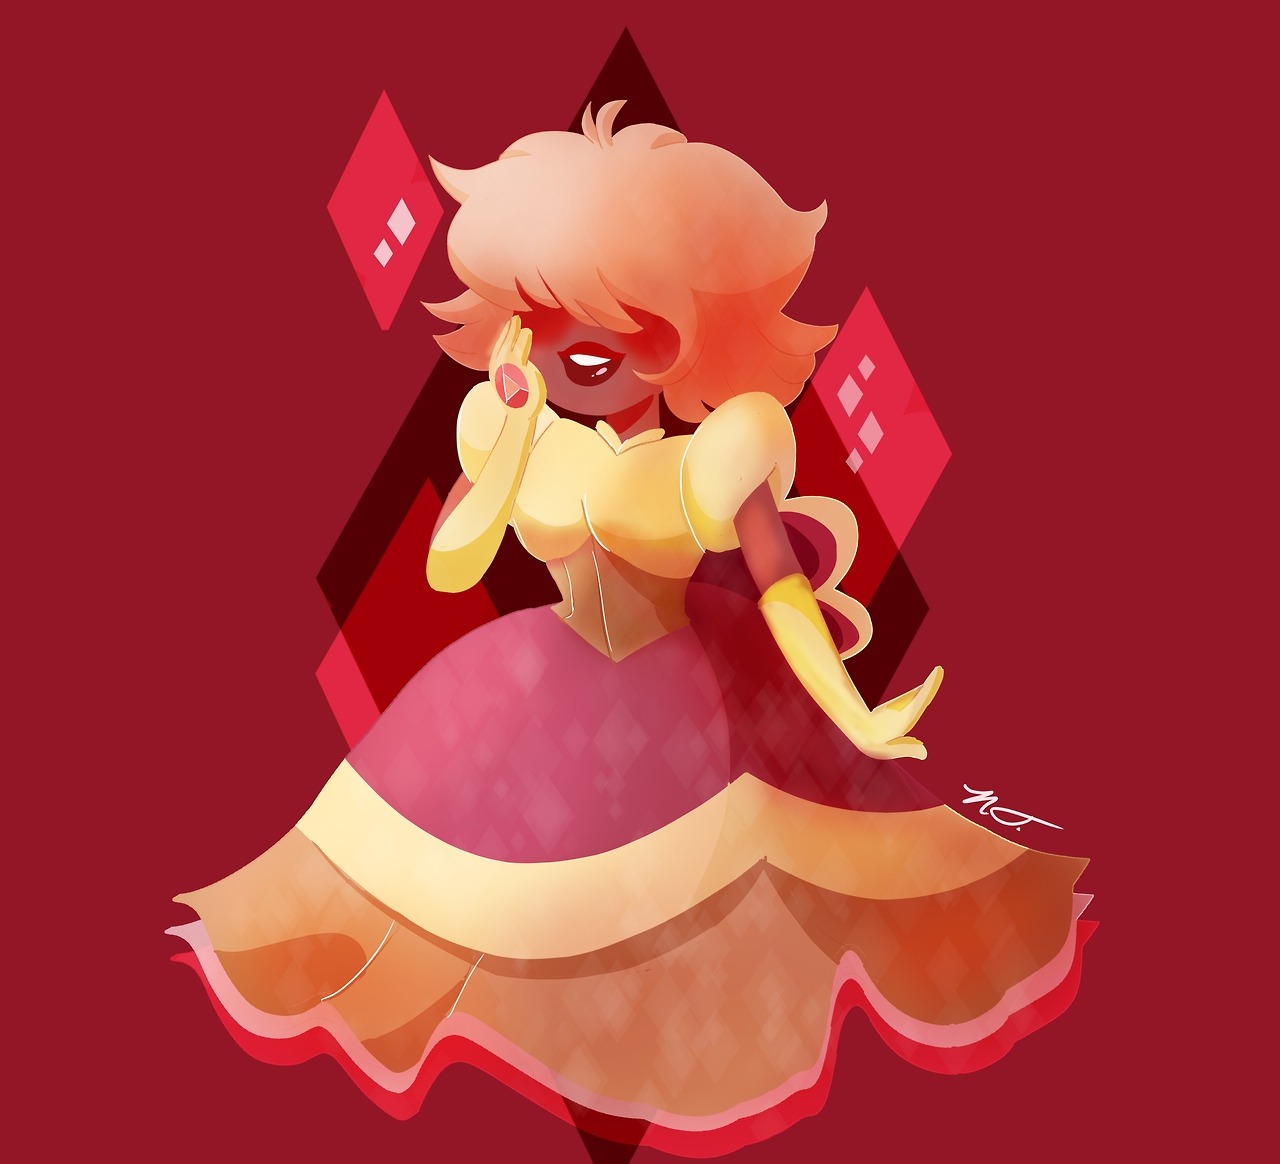 “I predict that people will love me! What a mystery!” I love Padparadscha shes so sweet and innocent and optimistic! Ill be def drawing the rest of the off colors i love them all!